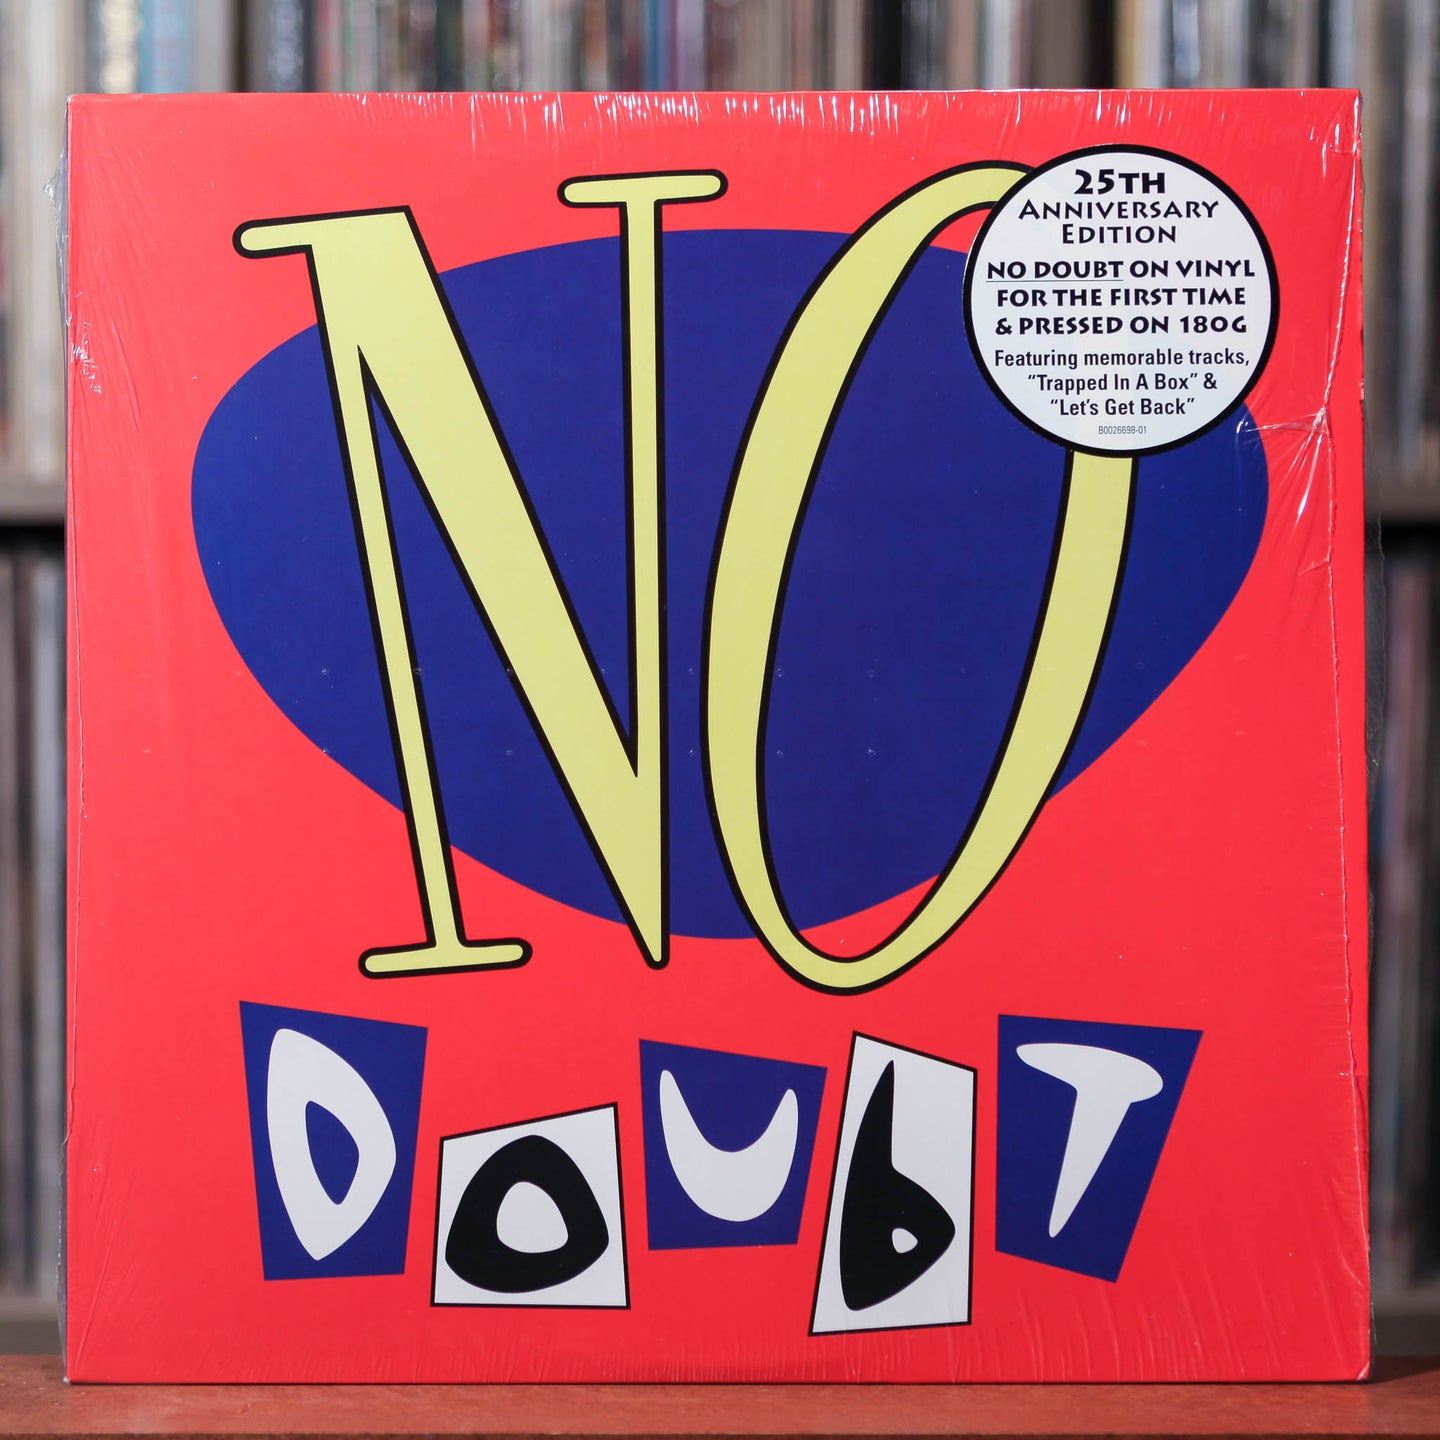 No Doubt - Self Titled - 2017 Interscope, EX/VG+